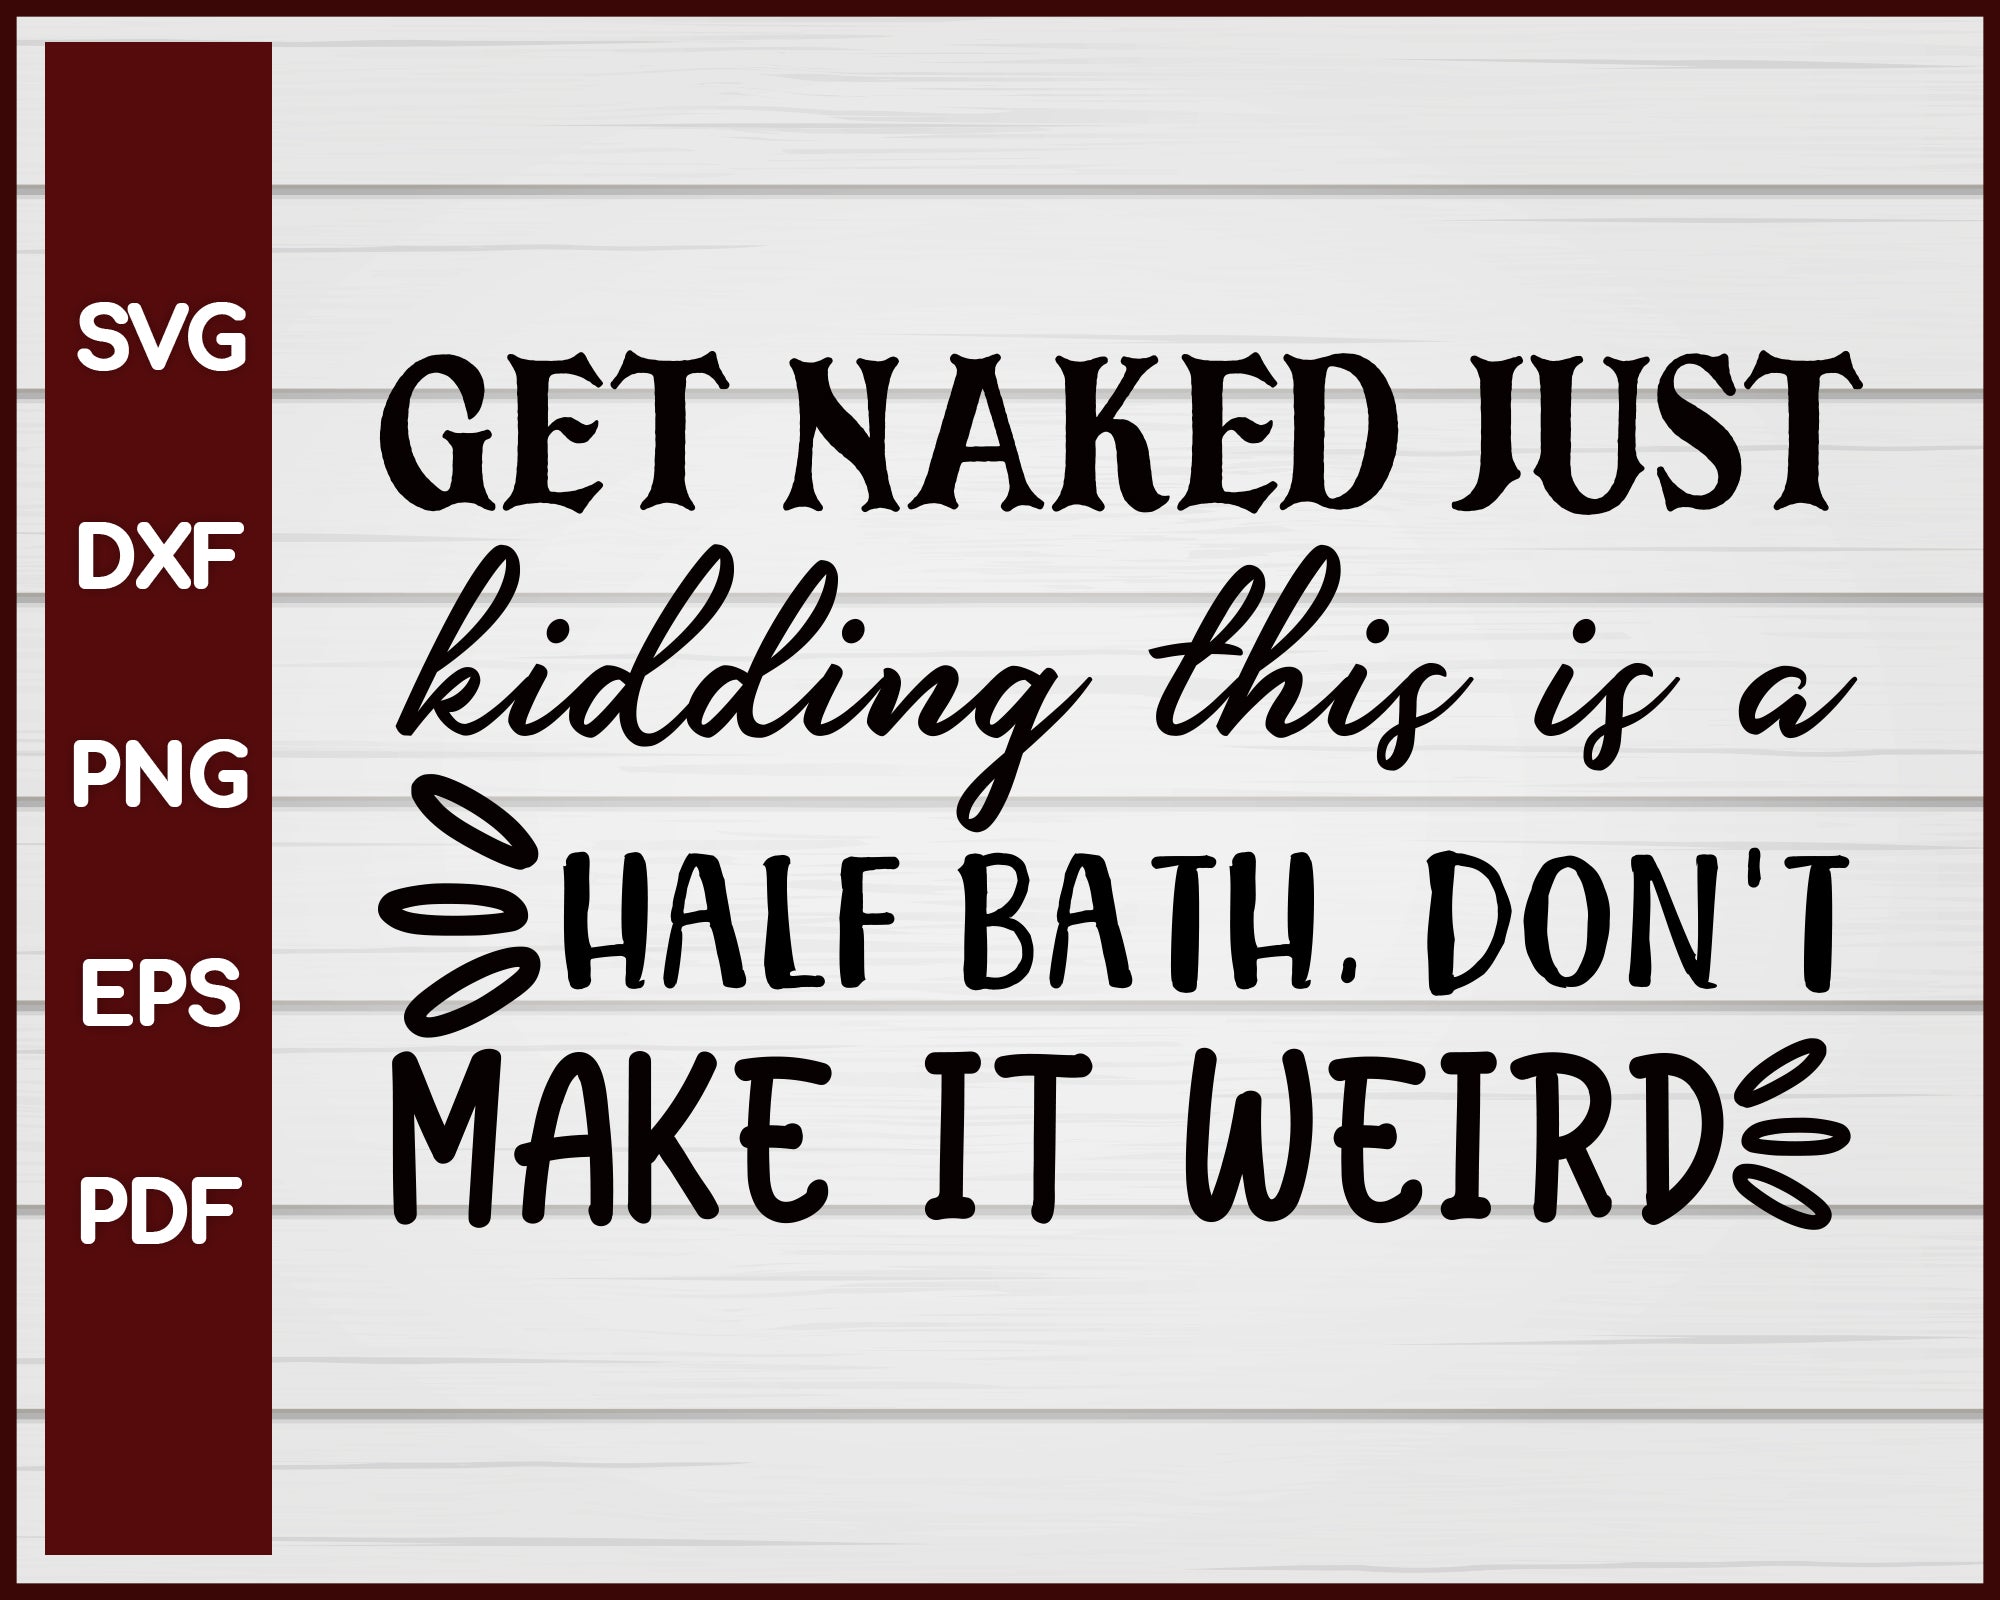 Get Naked Just Kidding This is a Half Bath, Don't Make it Weird svg Cut File For Cricut Silhouette eps png dxf Printable Files